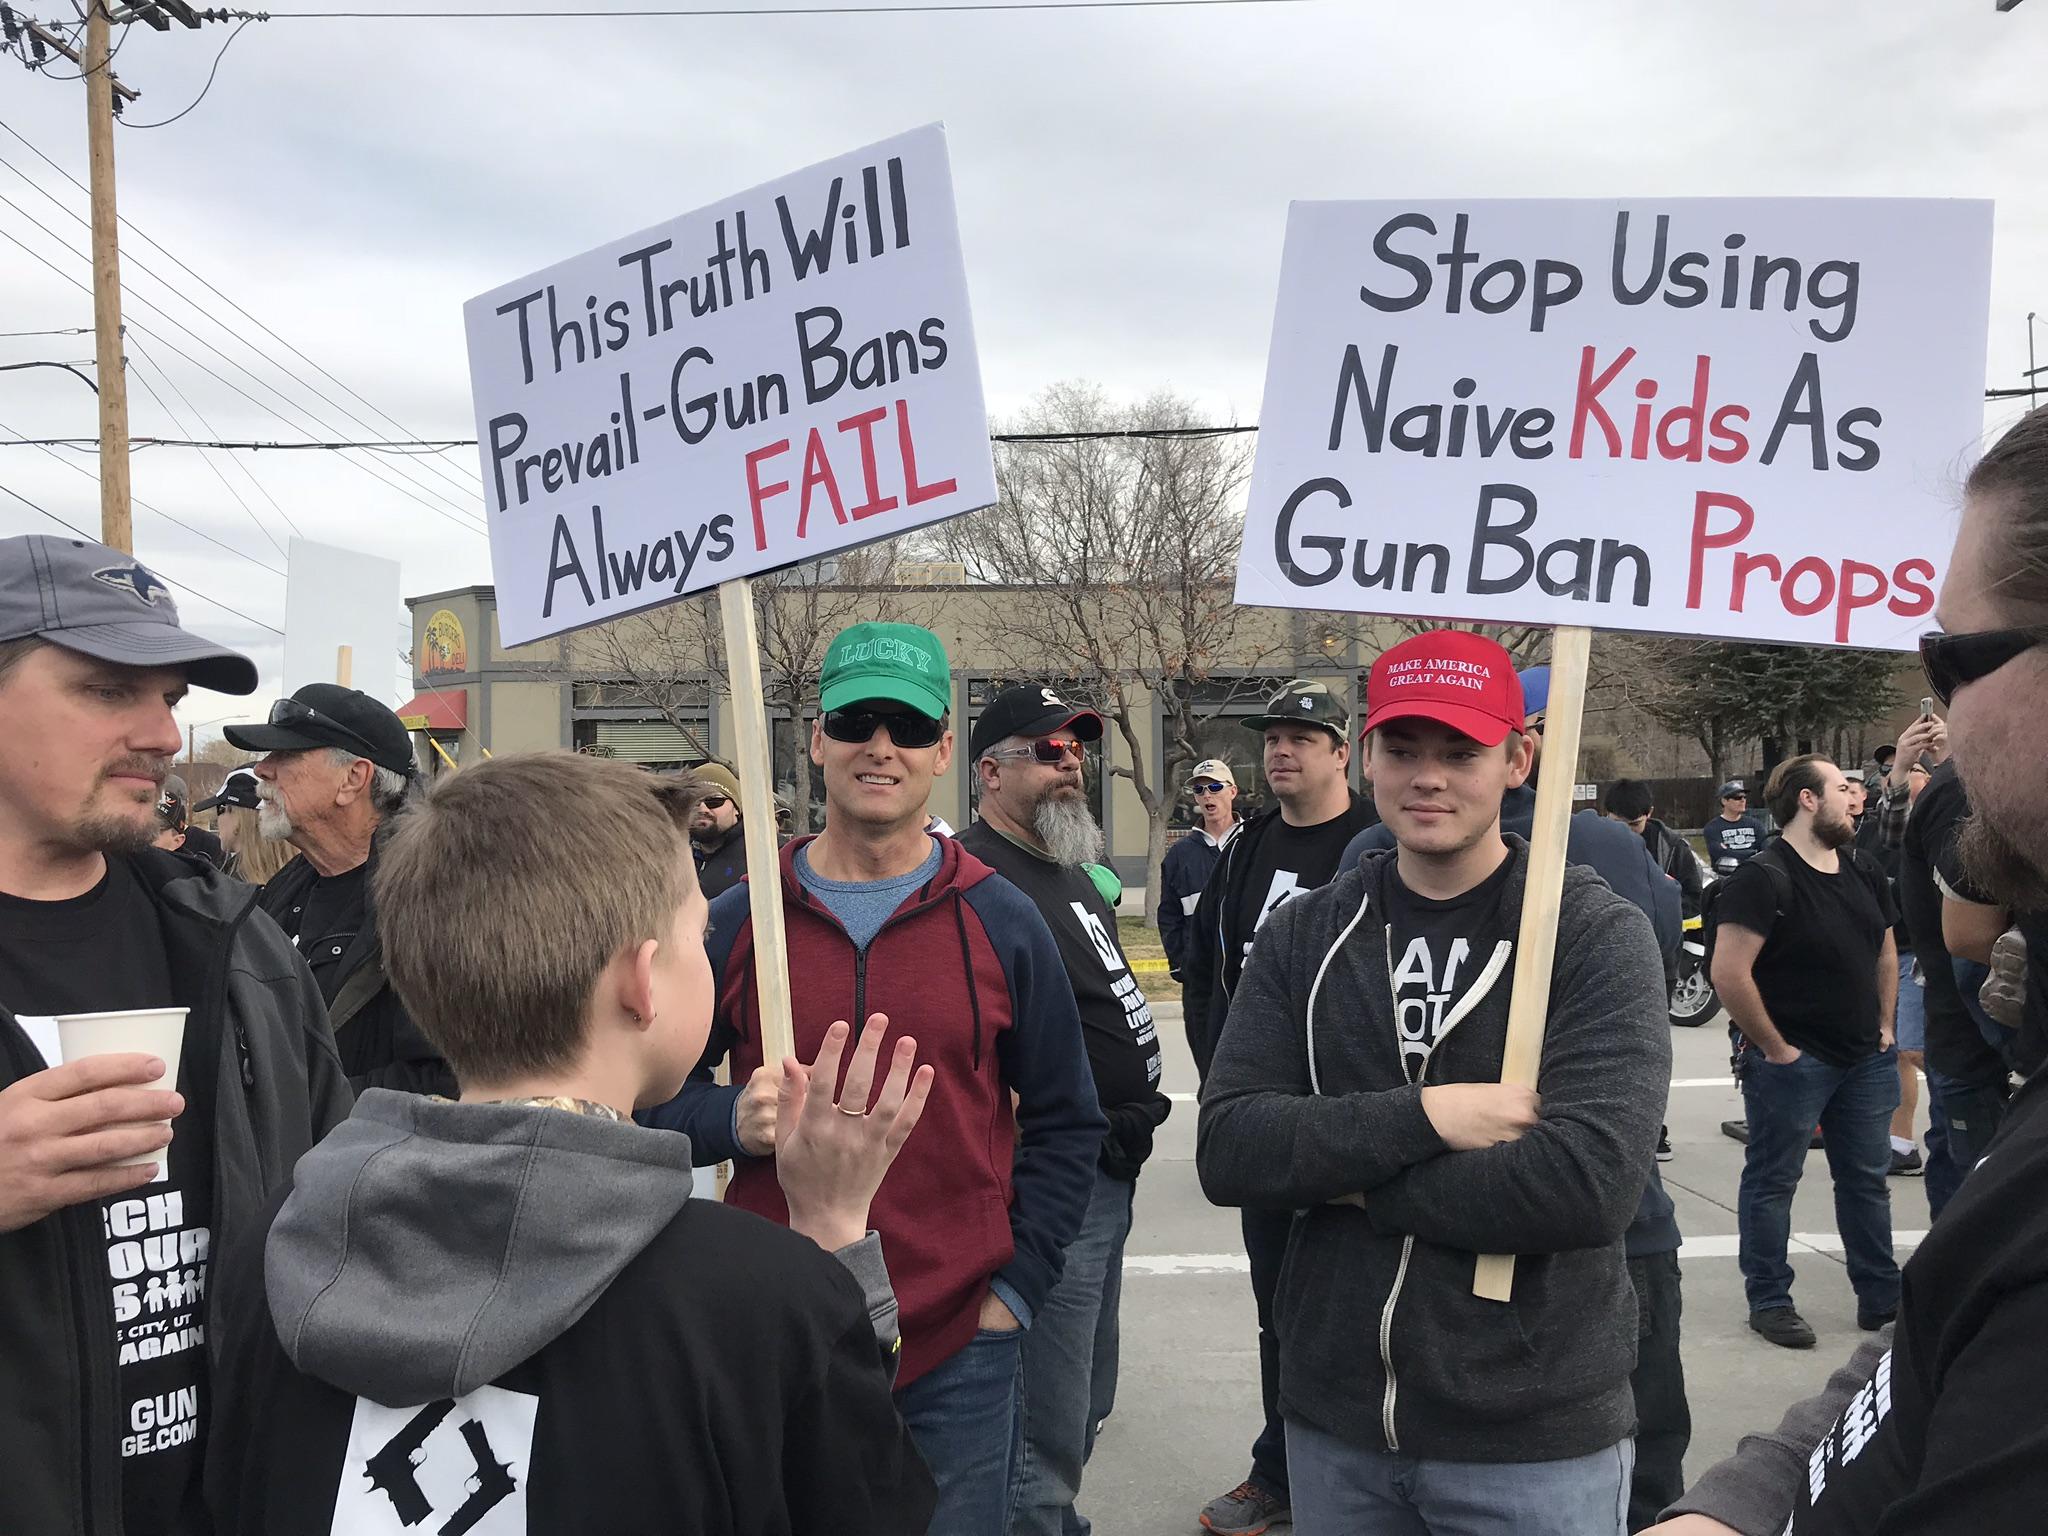 Utah Gun Advocates Hold Dueling March Ahead Of Student-Led 